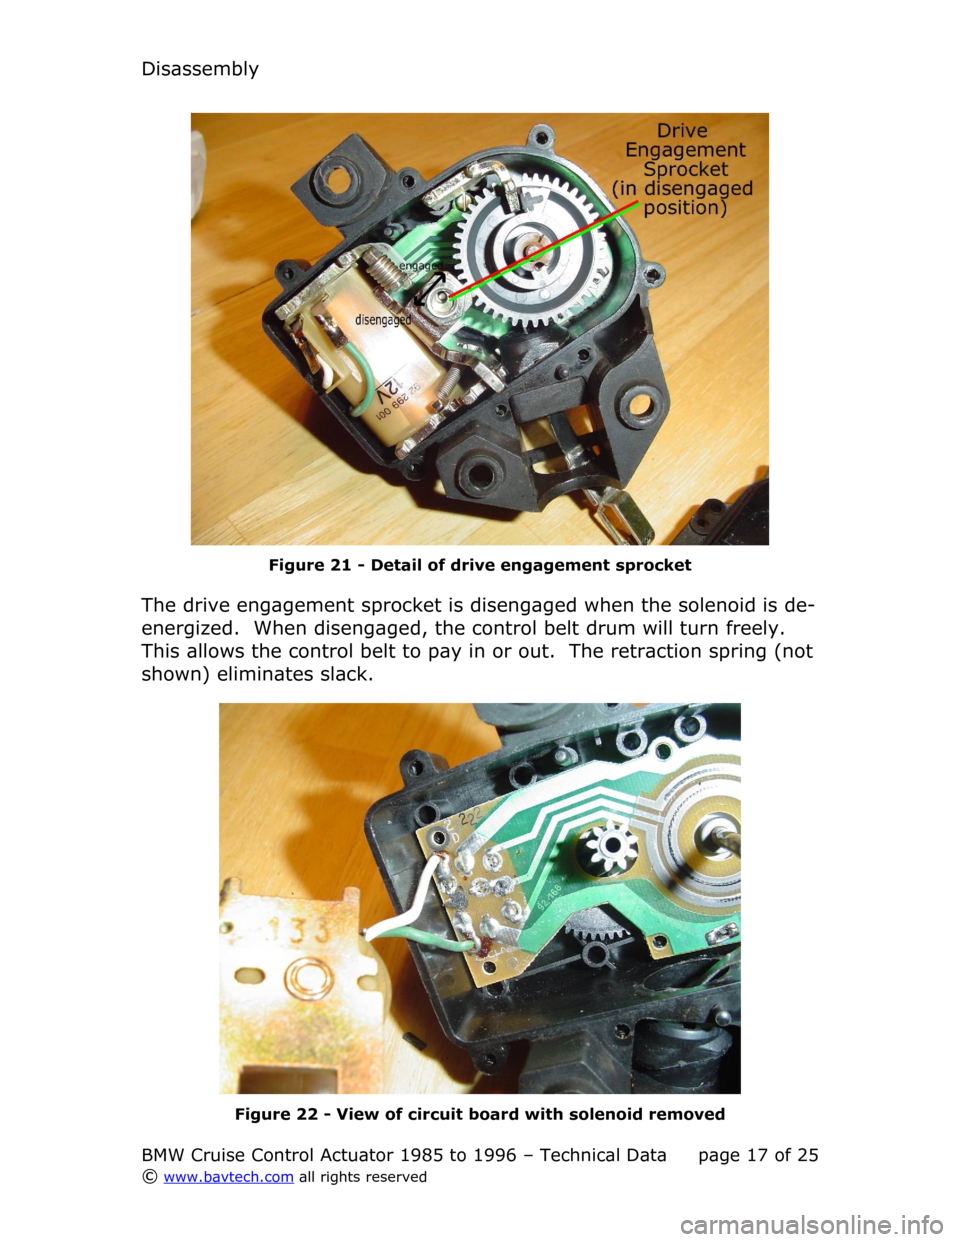 BMW 8 SERIES 1989 E31 Cruise Control Acutator Disassembly
Figure  21  - Detail of drive engagement sprocket
The drive engagement sprocket is disengaged when the solenoid is de-
energized.  When disengaged, the control belt drum will turn freely. 